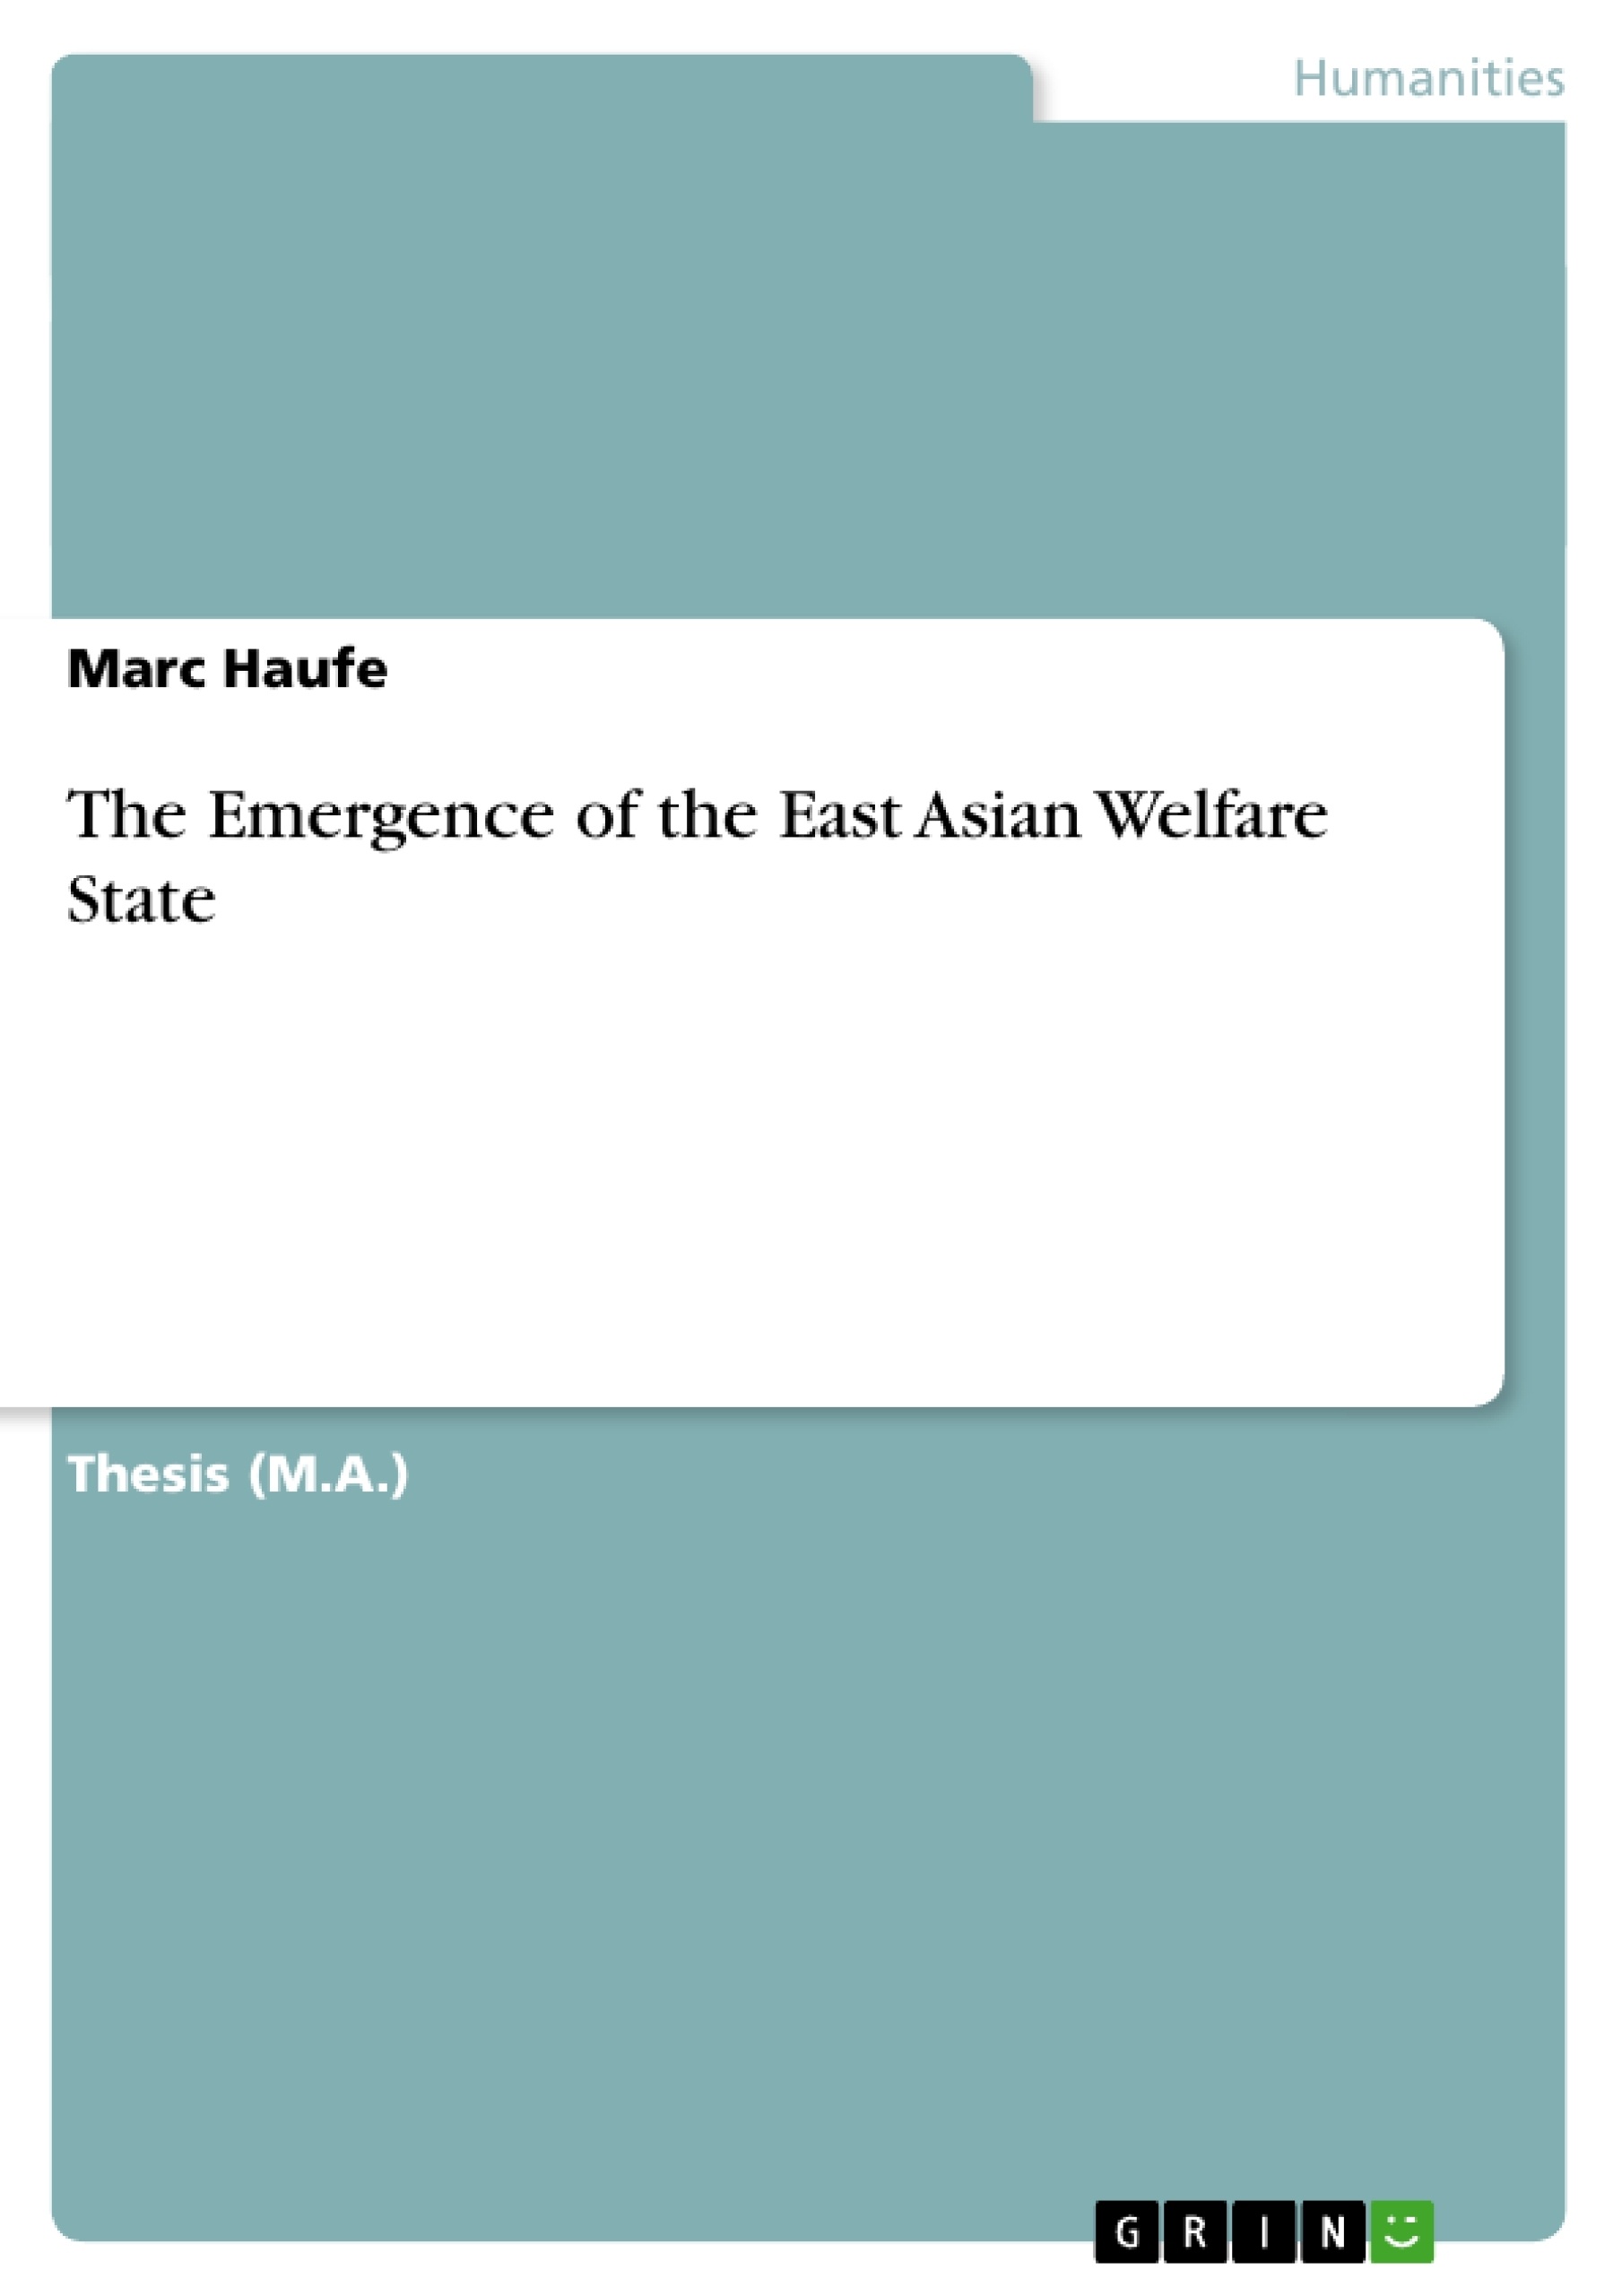 Titre: The Emergence of the East Asian Welfare State